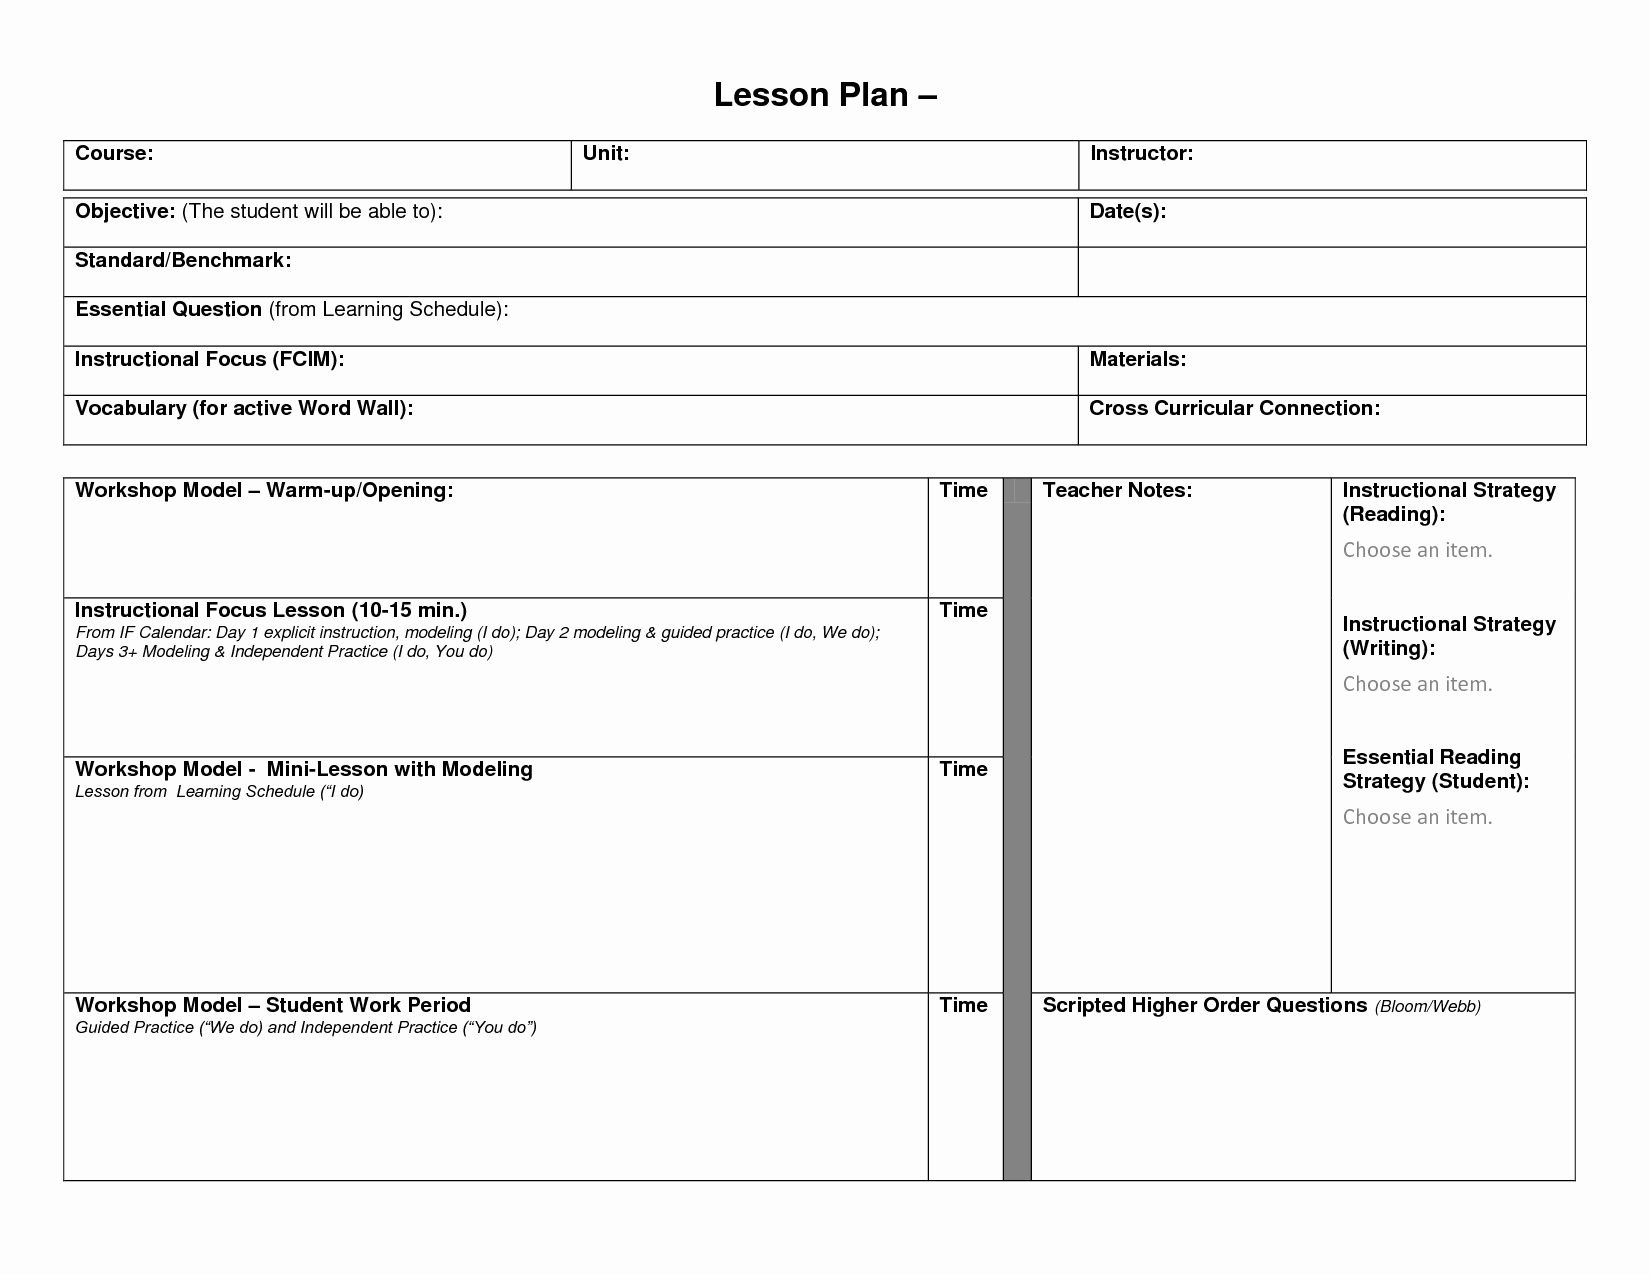 Lesson Plan format Template Awesome Blank Lesson Plan format Template